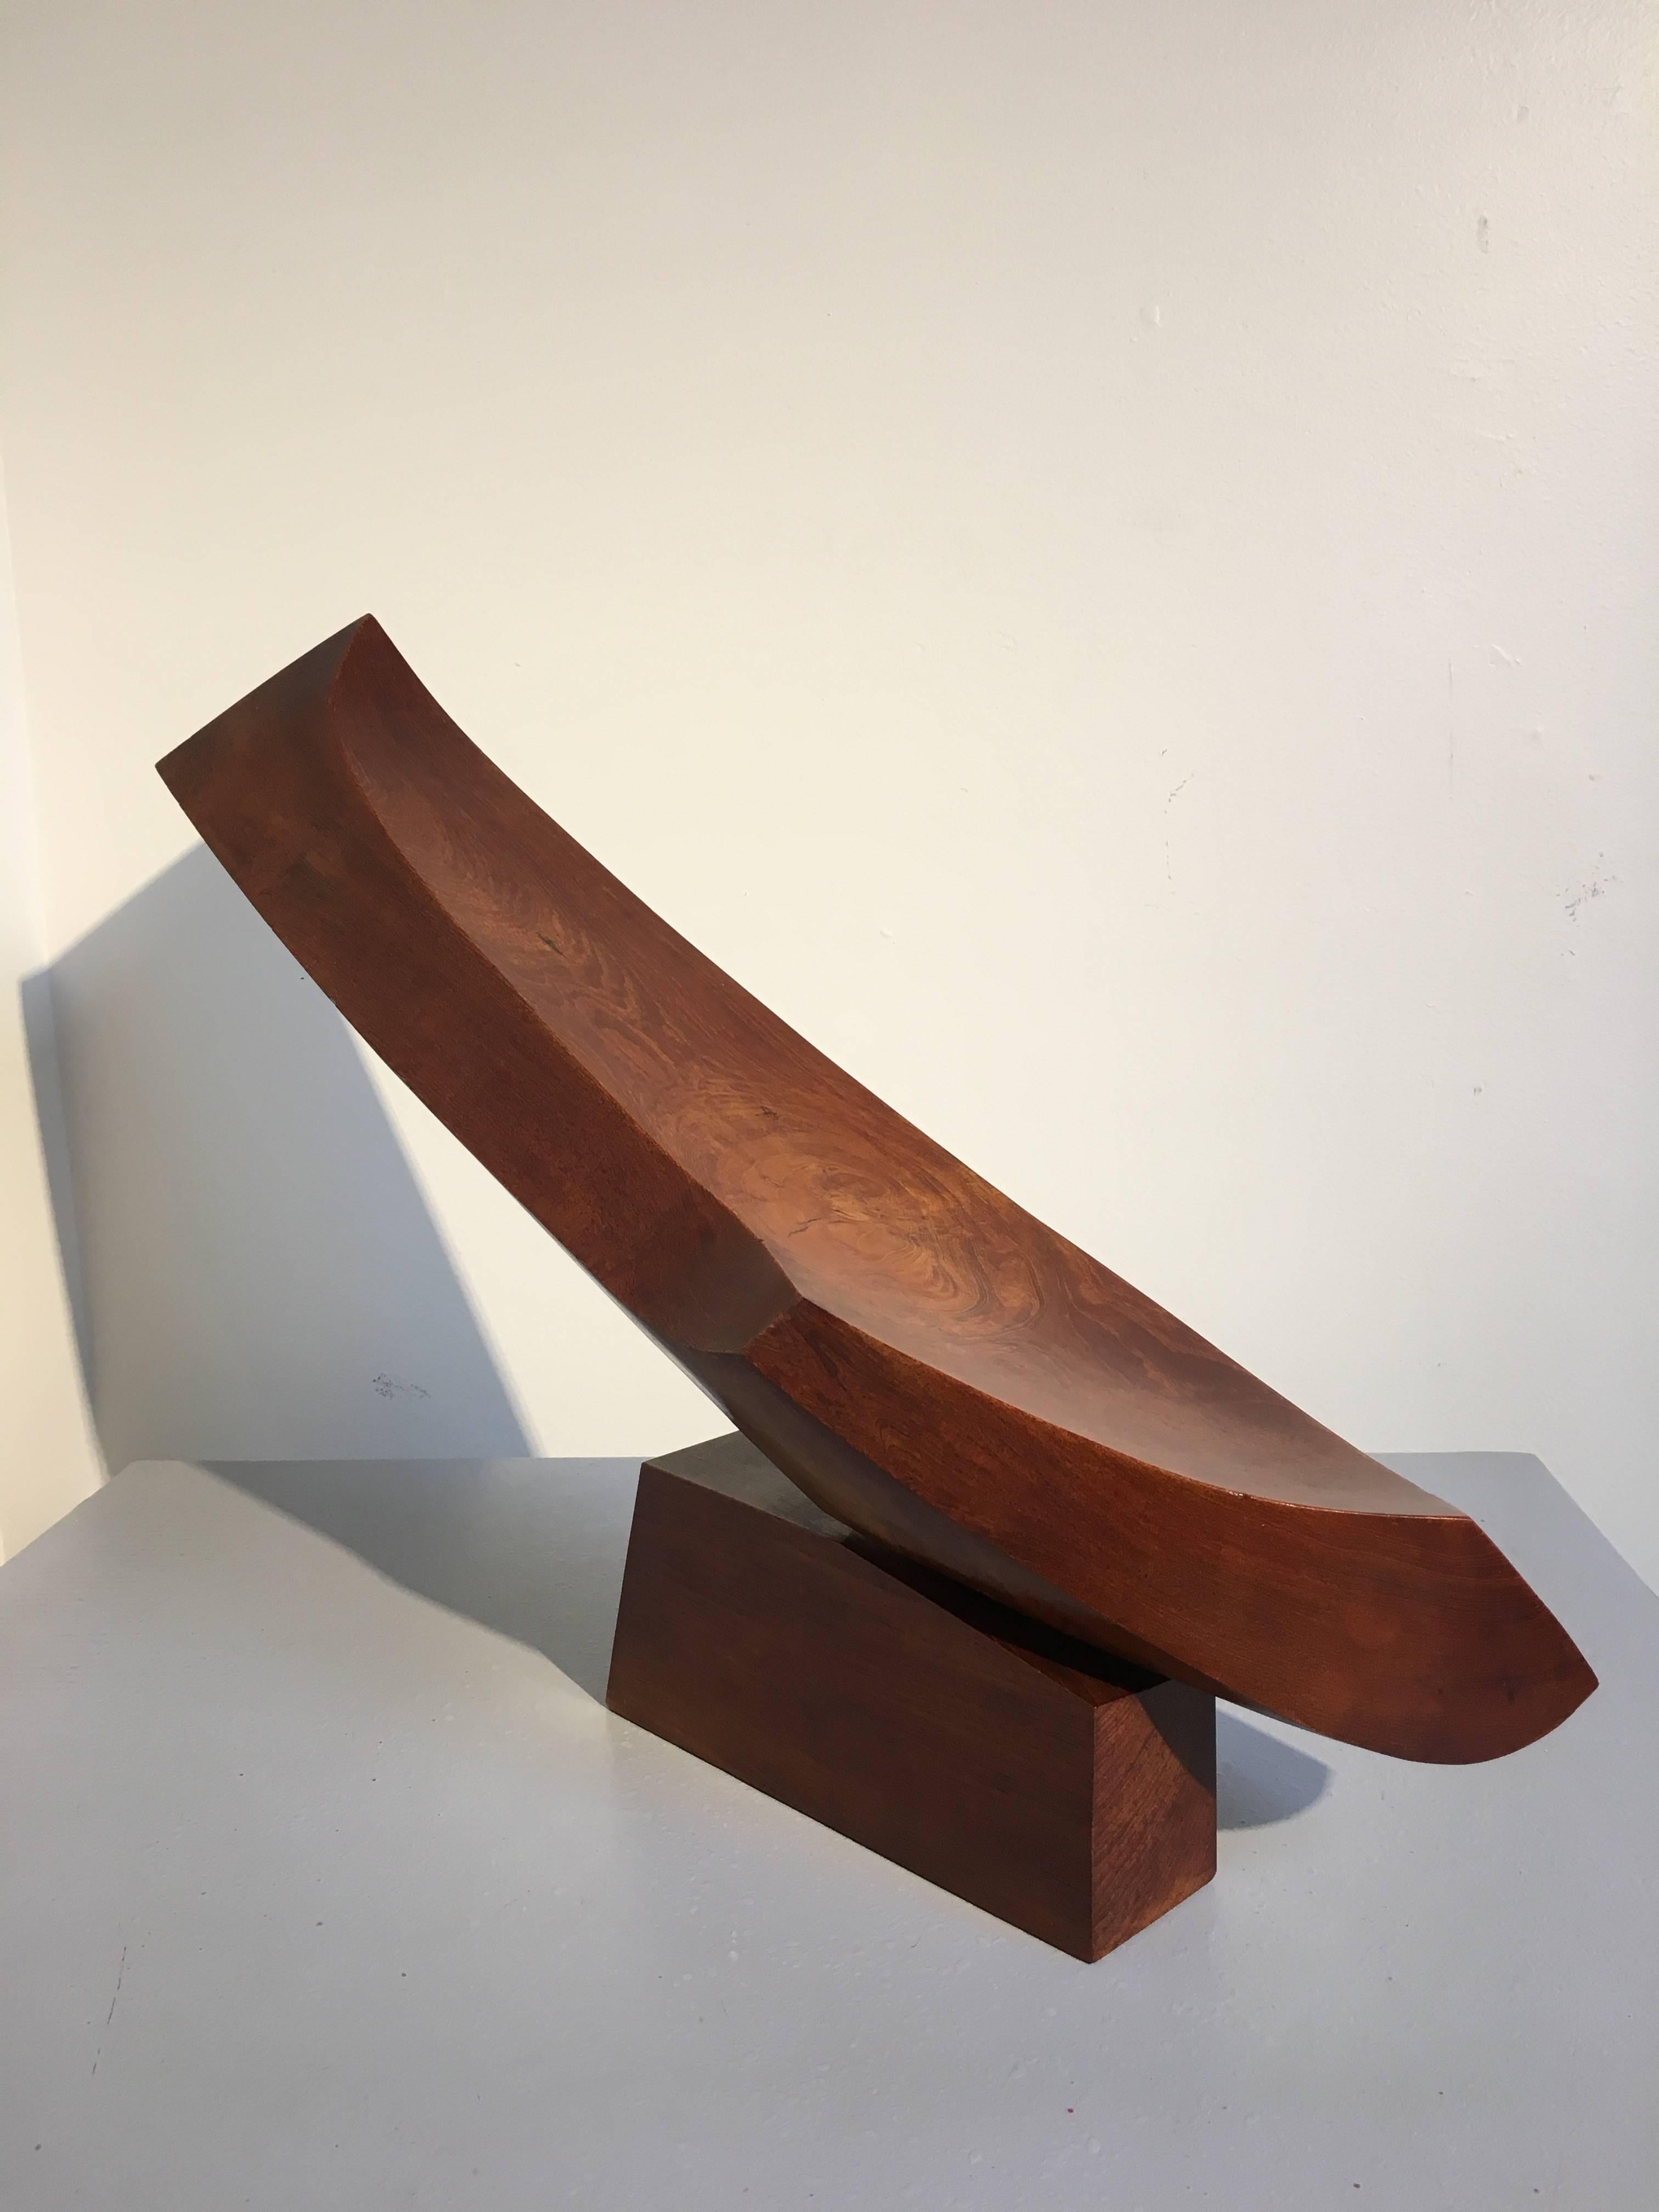 Hand-Carved Japanese Abstract Expressionist Carved Wood Sculpture by Takao Kimura For Sale